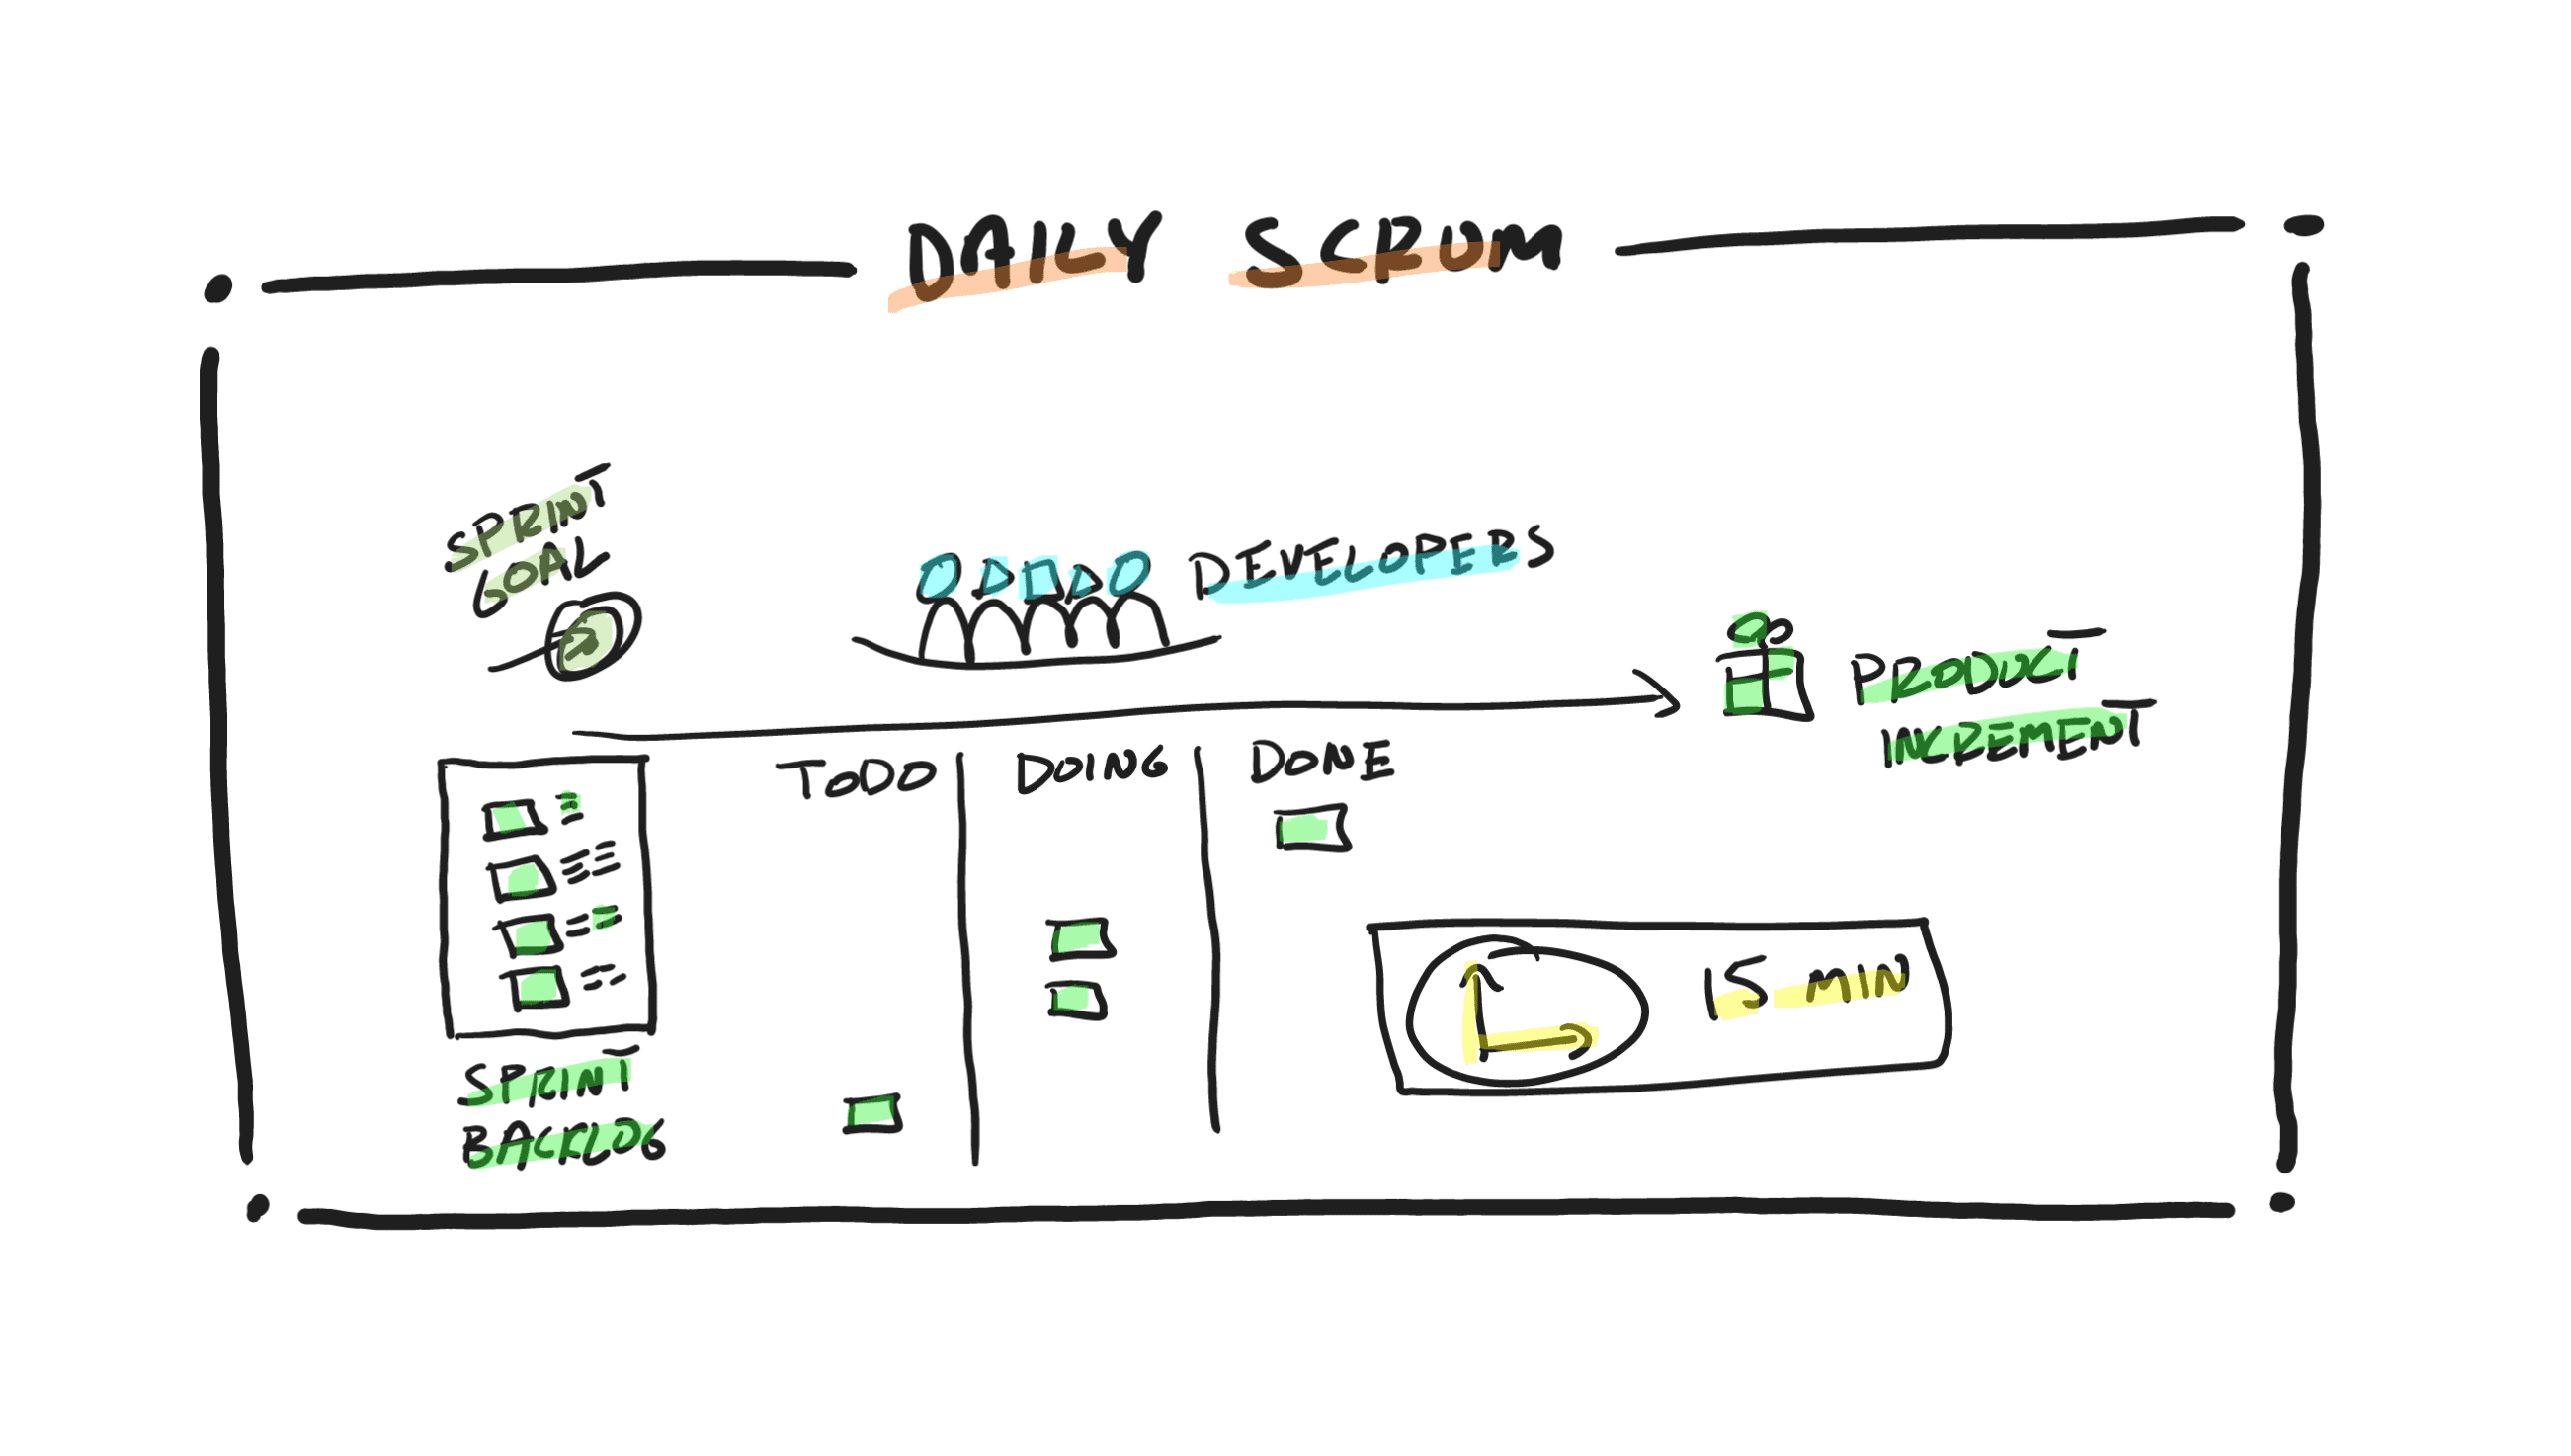 Daily Scrum in a Nutshell